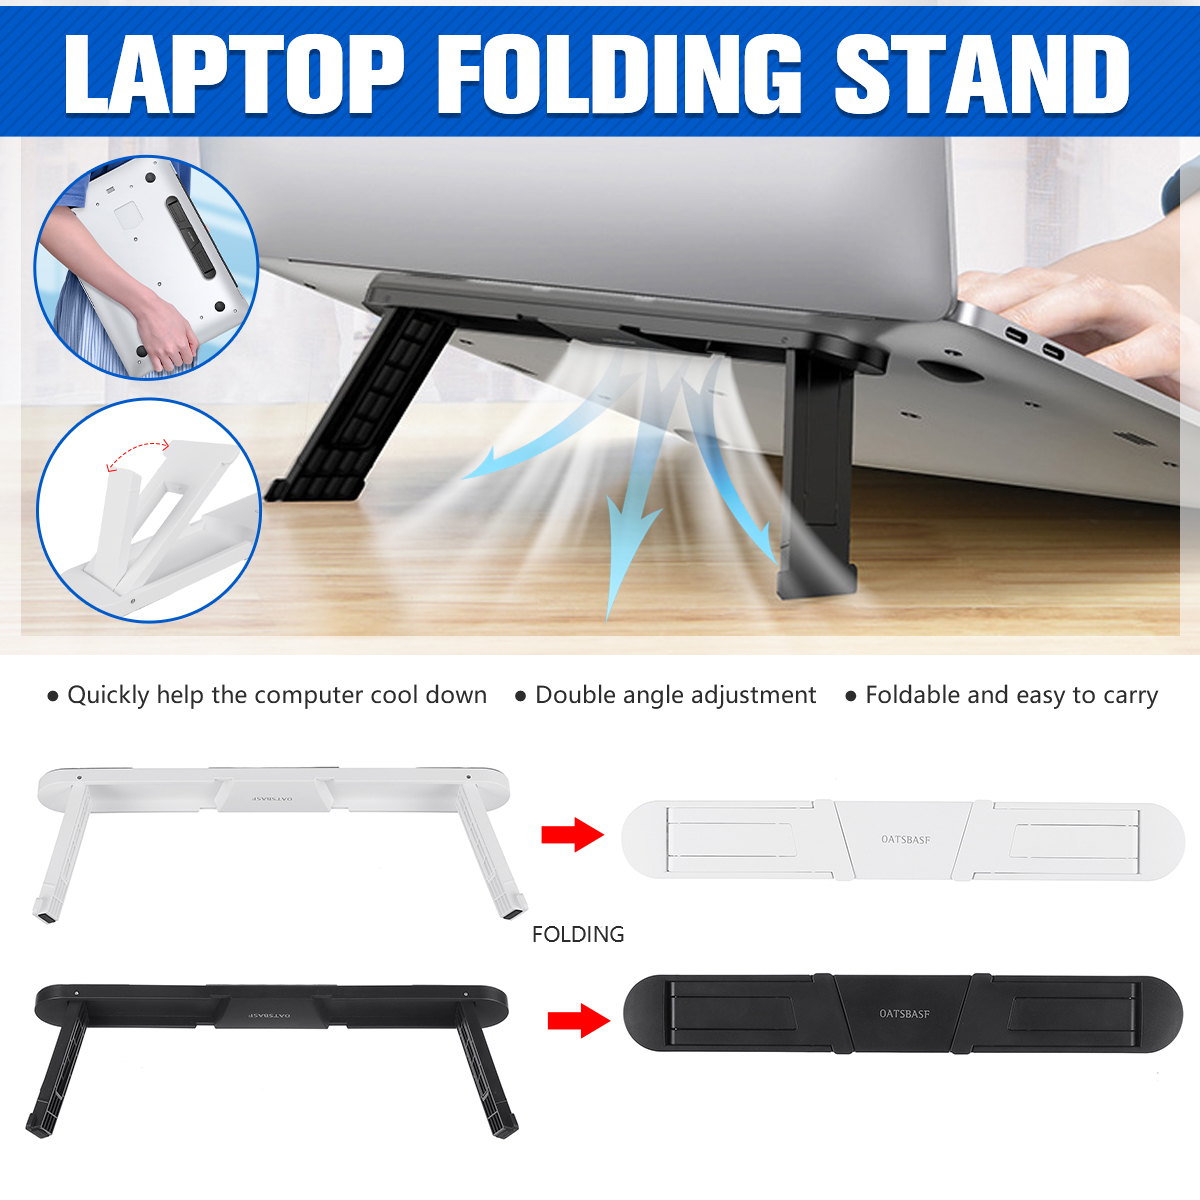 Portable-Folding-Double-Angle-Adjustable-Heat-Dissipation-Cooling-Down-Sticky-Macbook-Holder-Stand-f-1832936-1